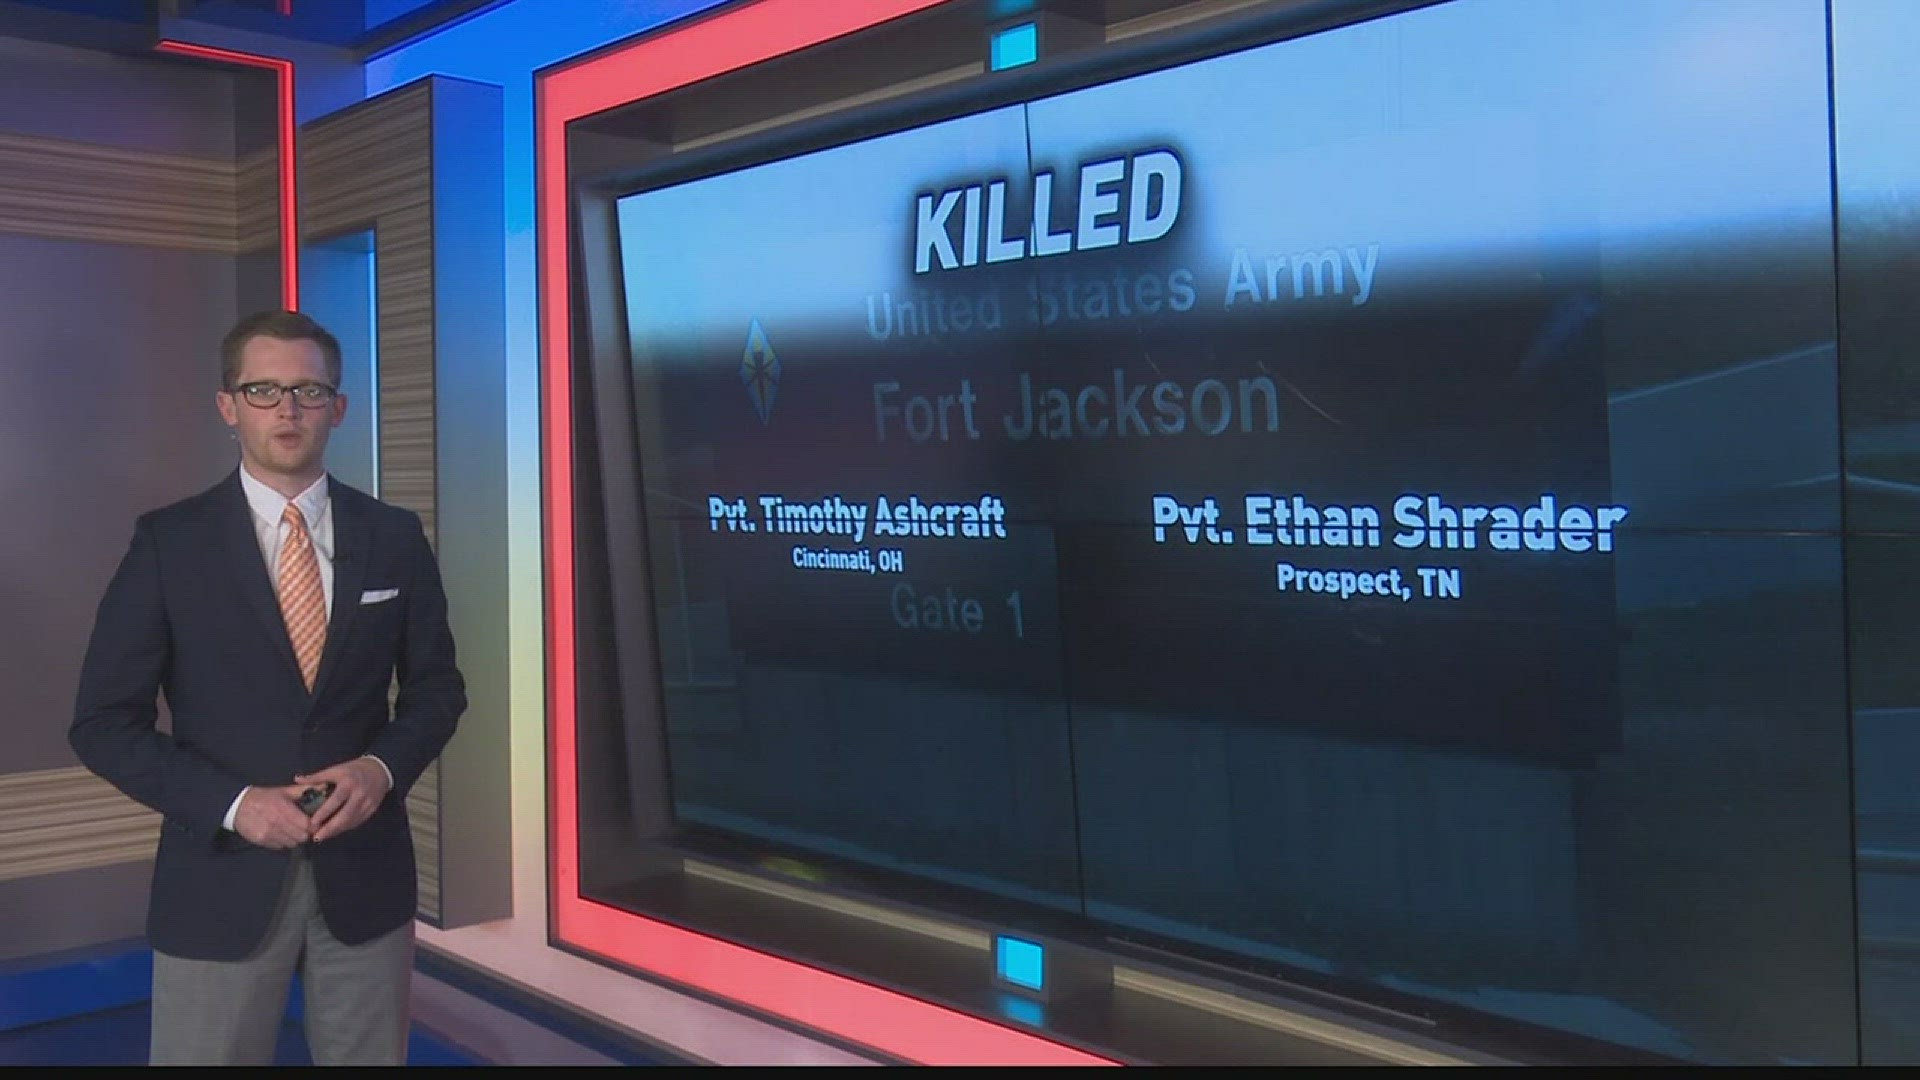 The two soldiers killed at Fort Jackson have been identified.